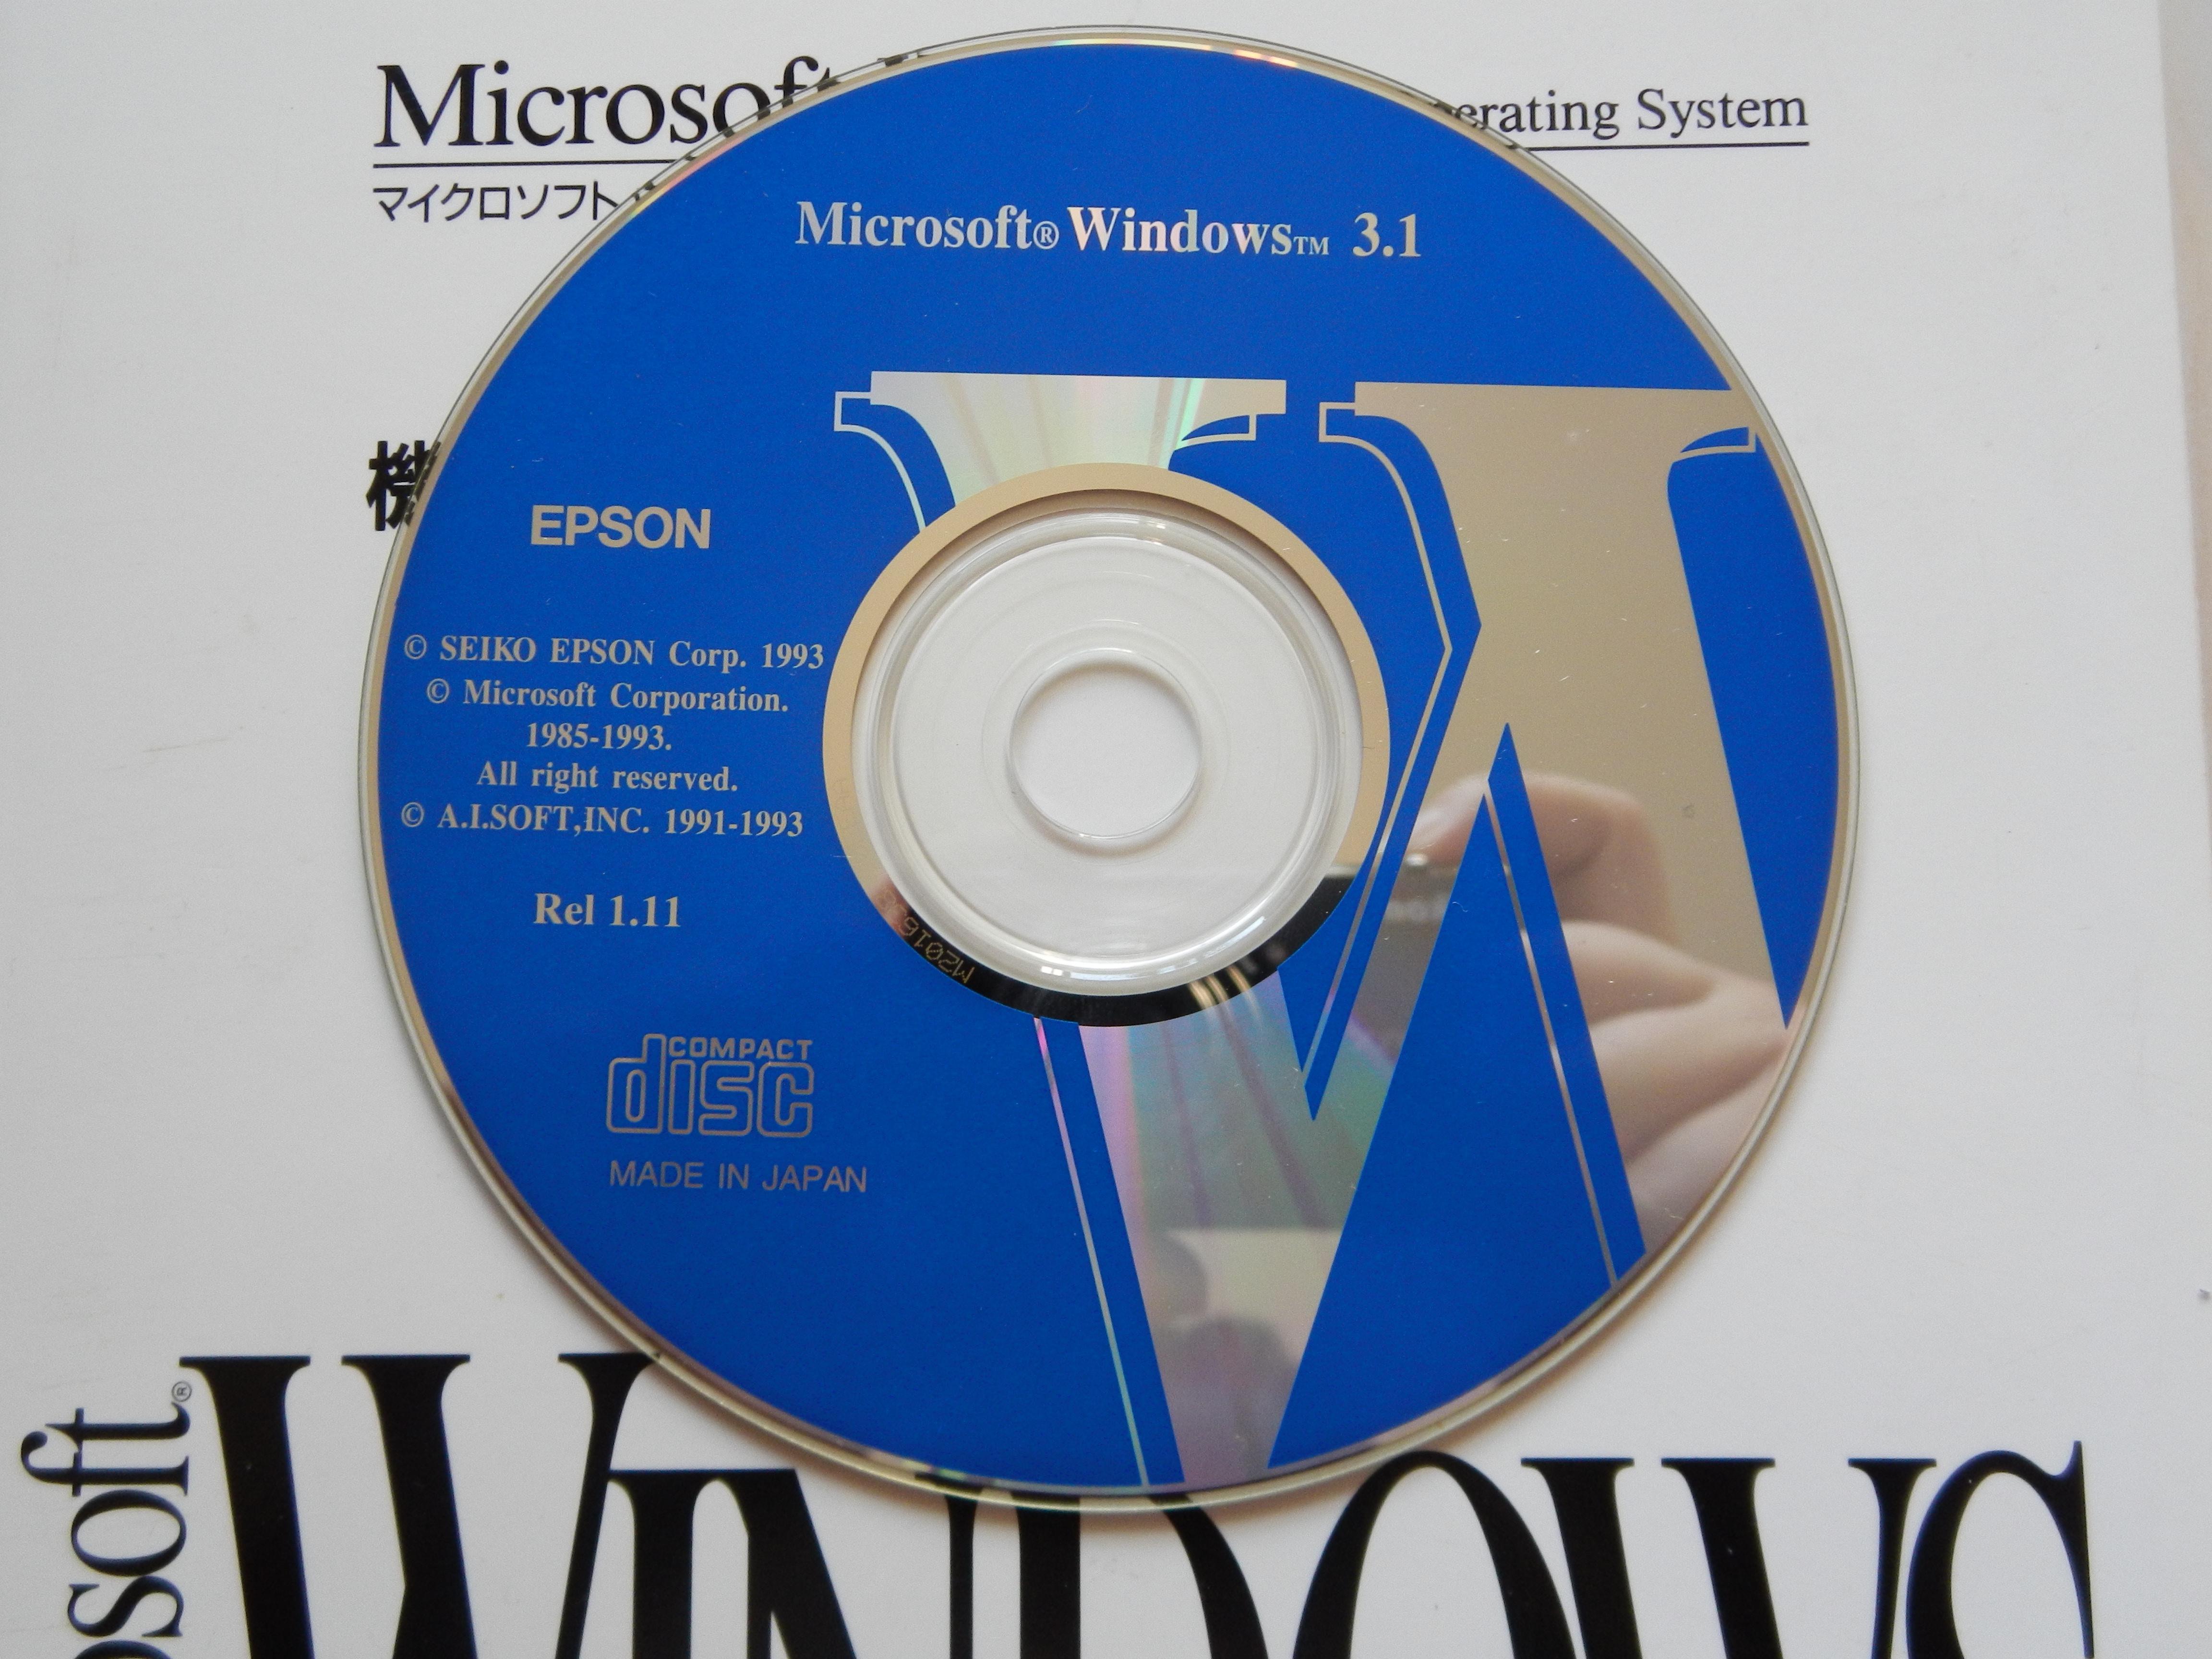 View topic - [OFFER] Epson Windows 3.1 CD-ROM for PC-9800 computers ...